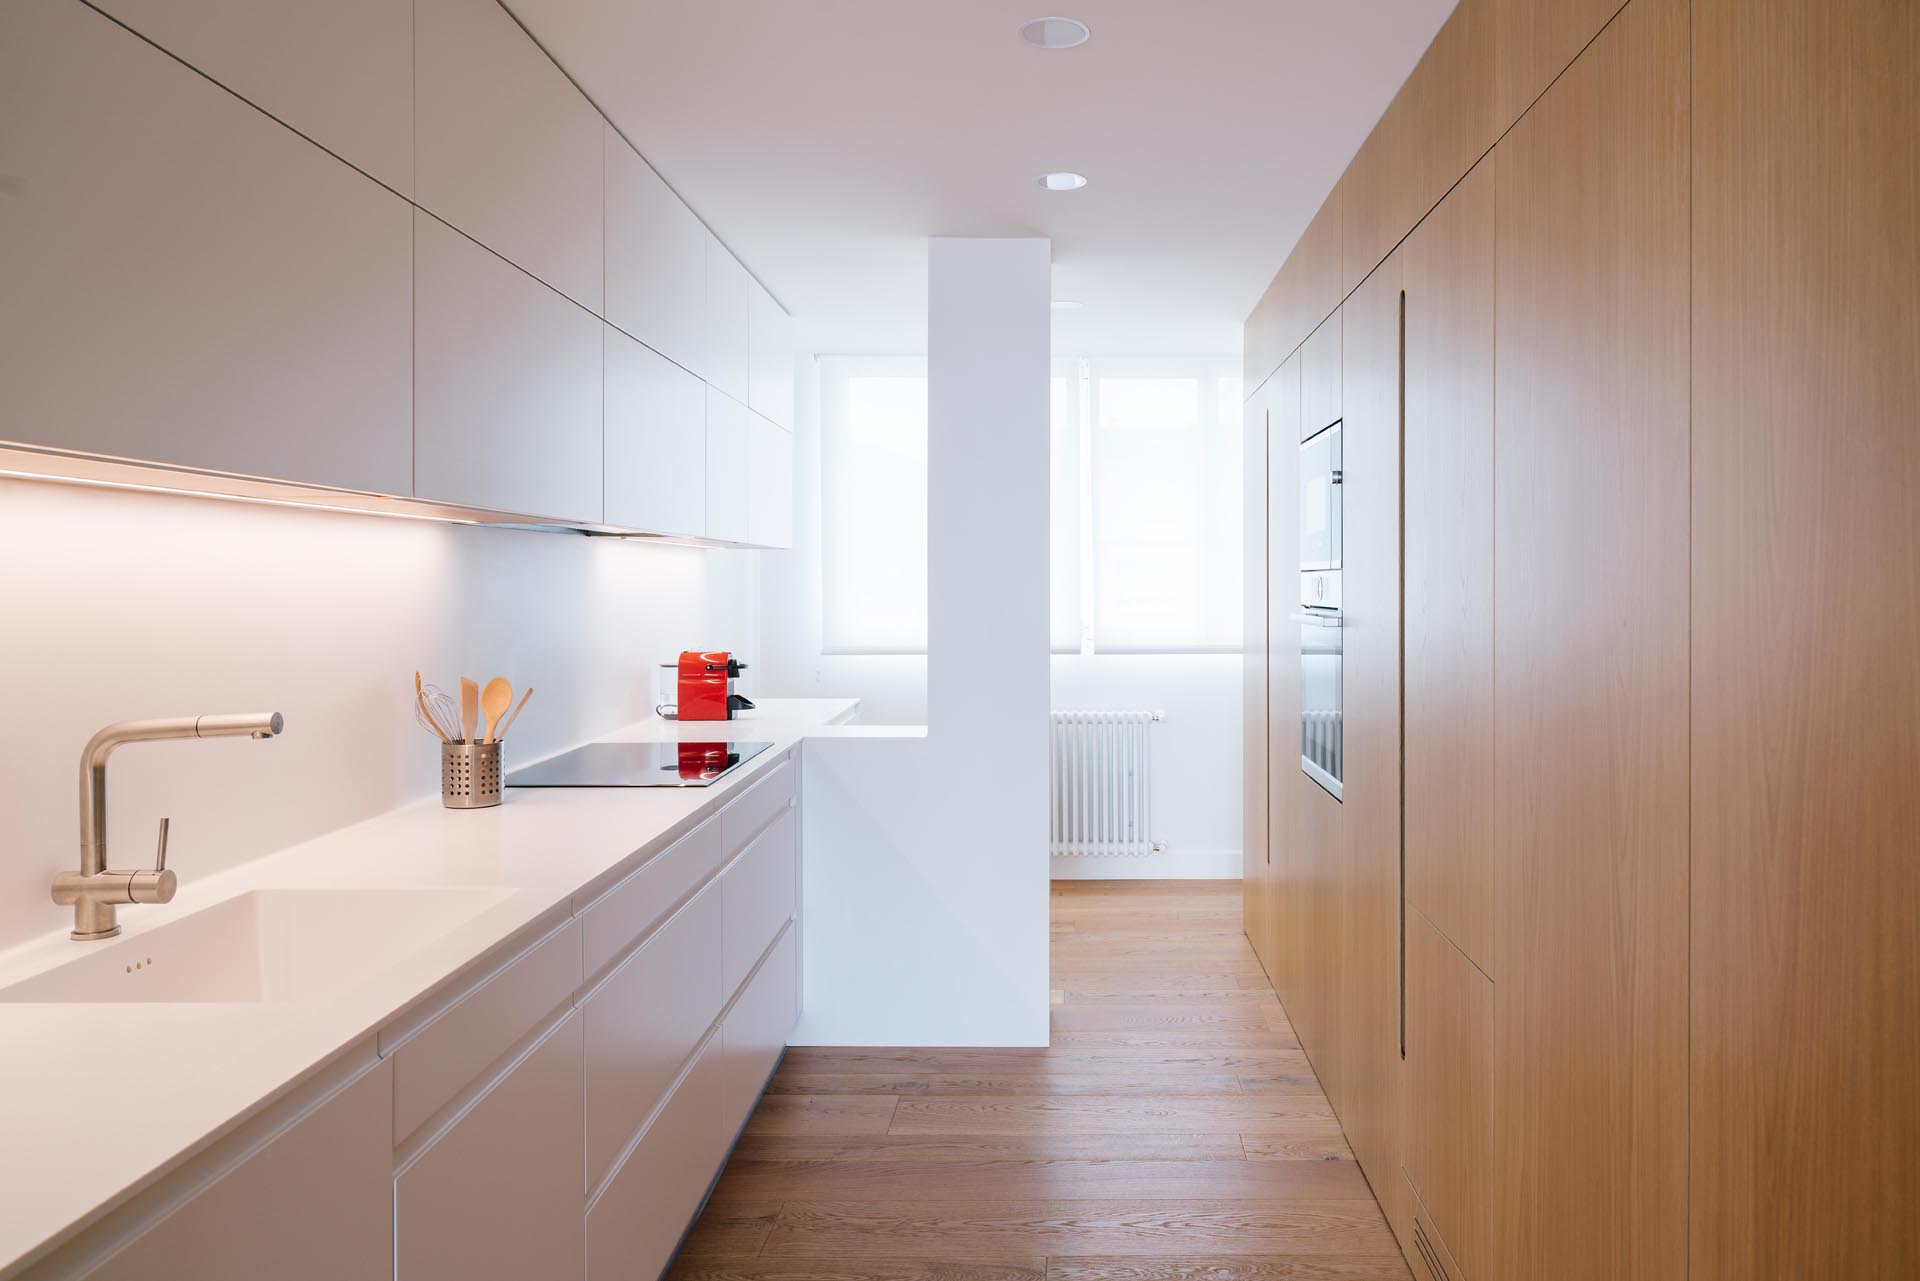 A modern kitchen with minimalist white and wood cabinets.